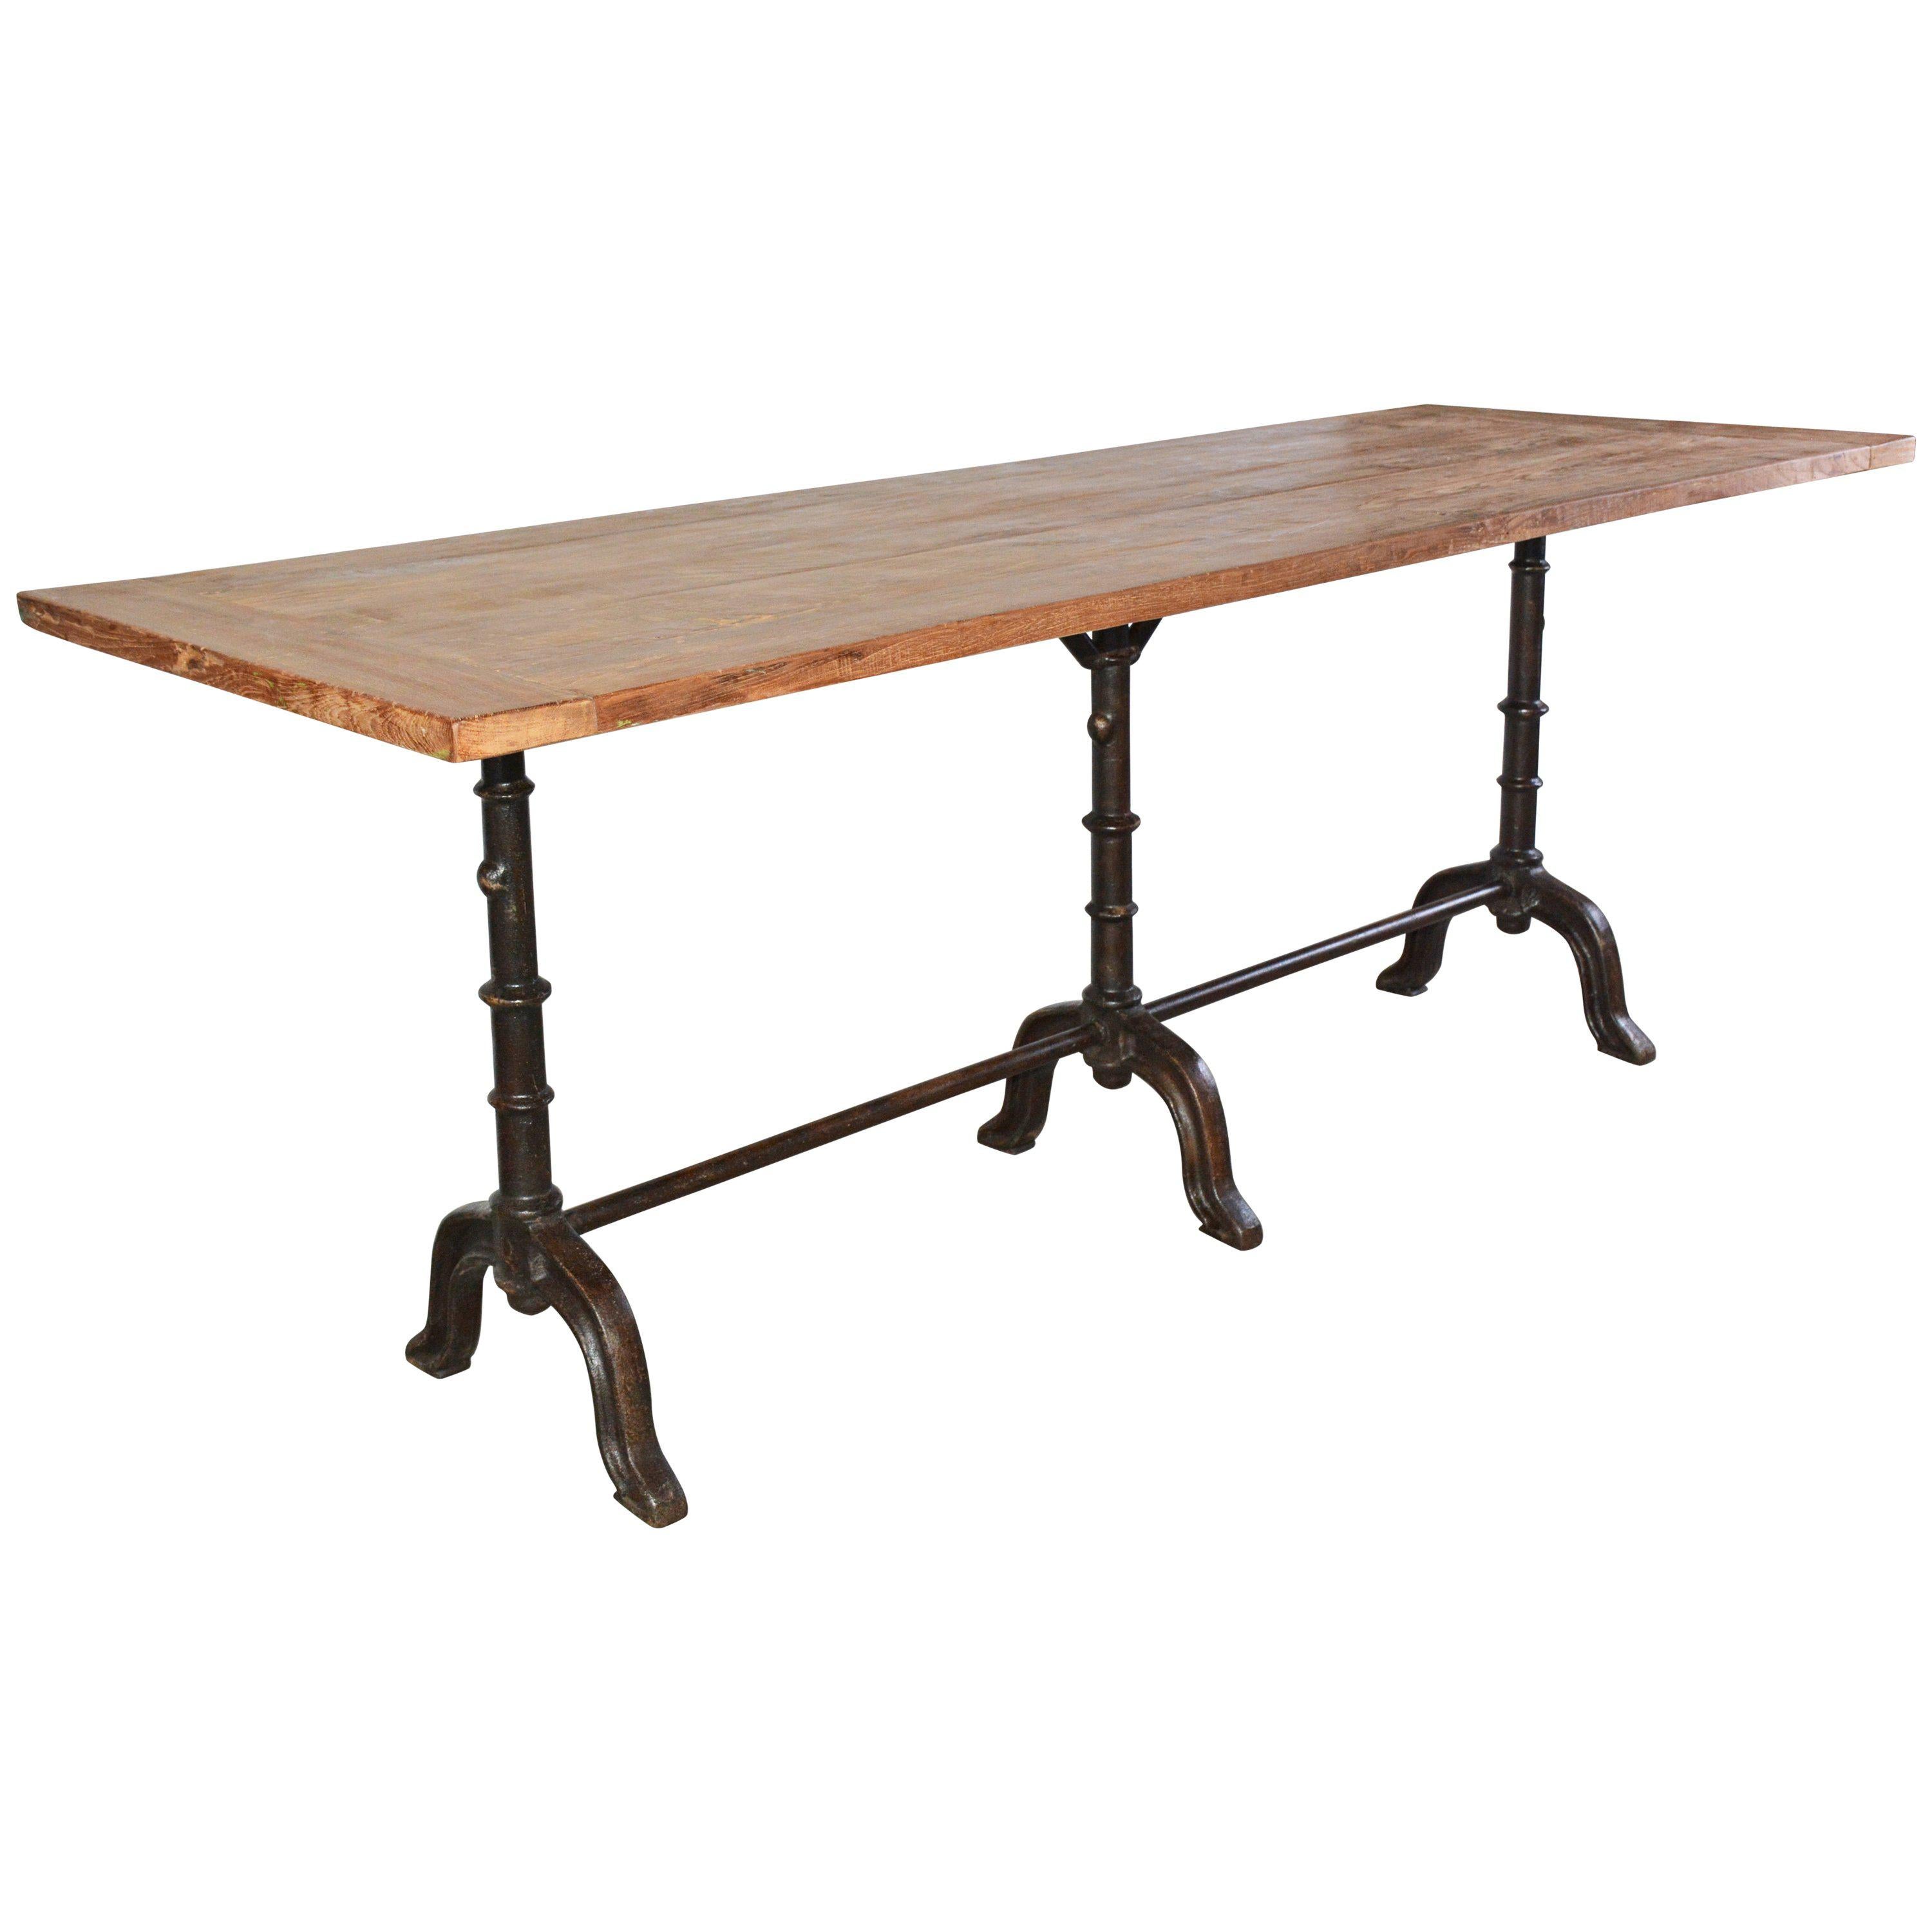 French Country Cafe Bistro Dining Table